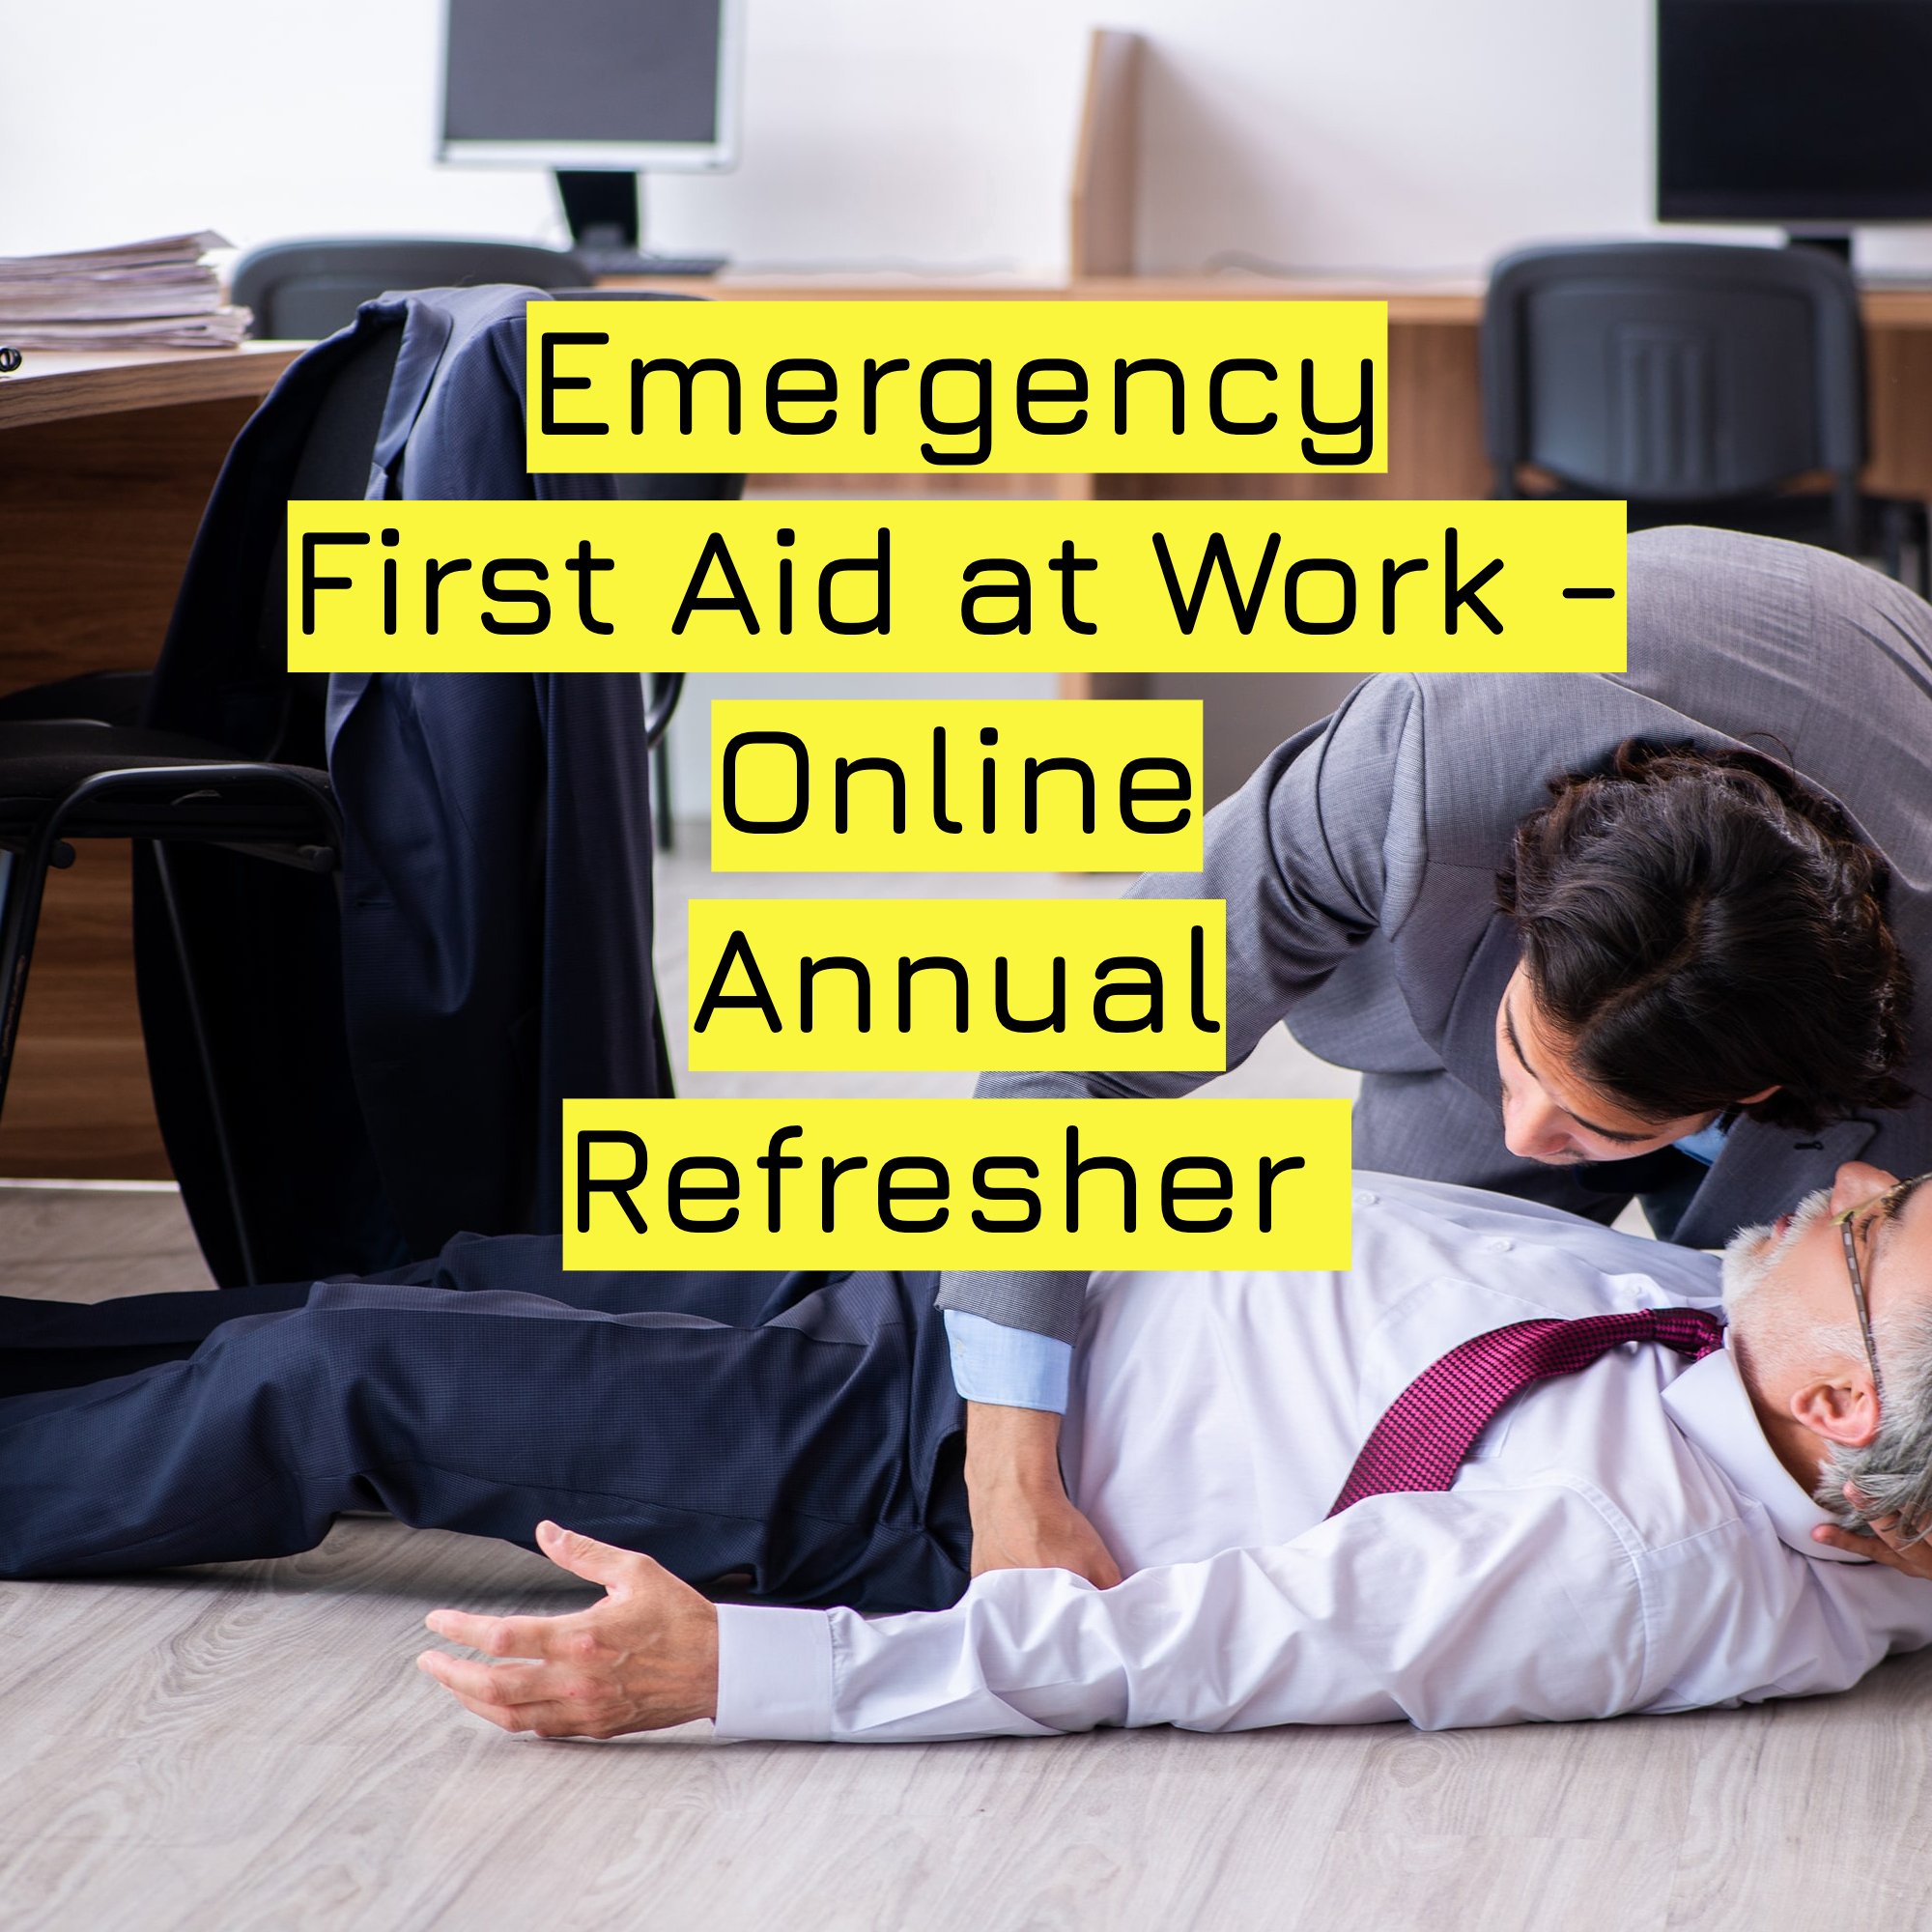 Emergency First Aid at Work - Online Annual Refresher .jpg